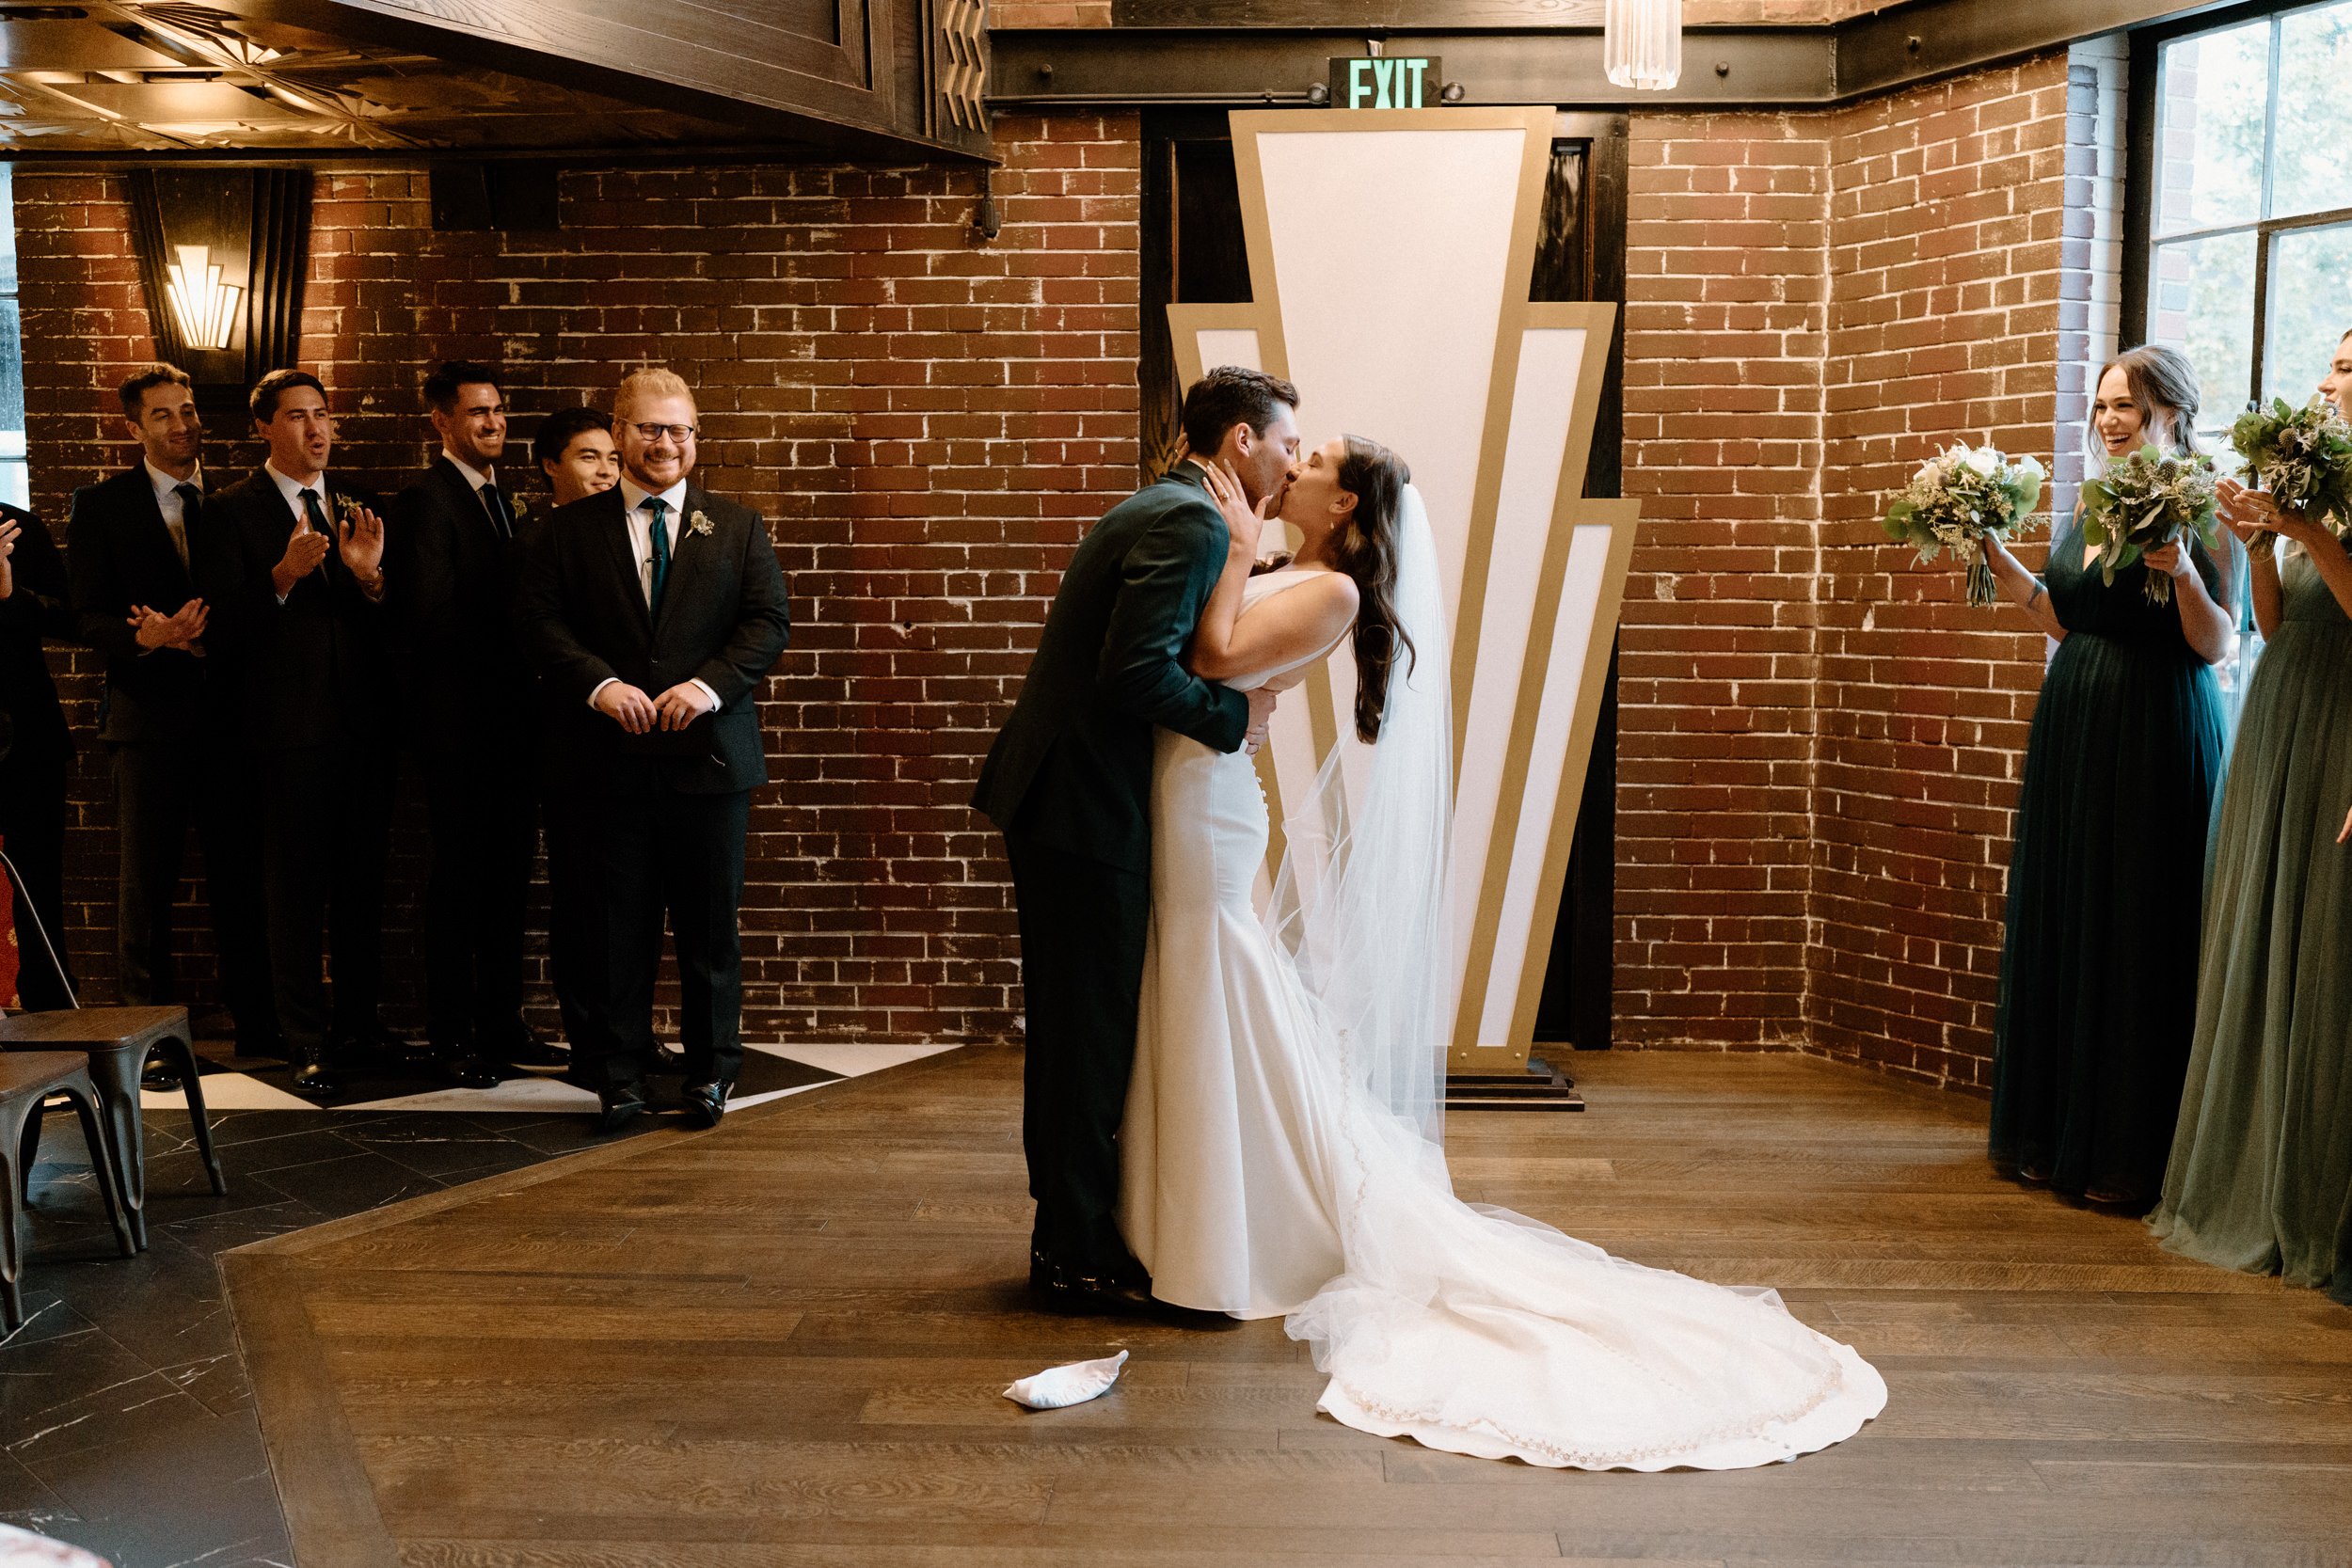 The bride and groom share their first kiss at Ironworks in Denver, CO